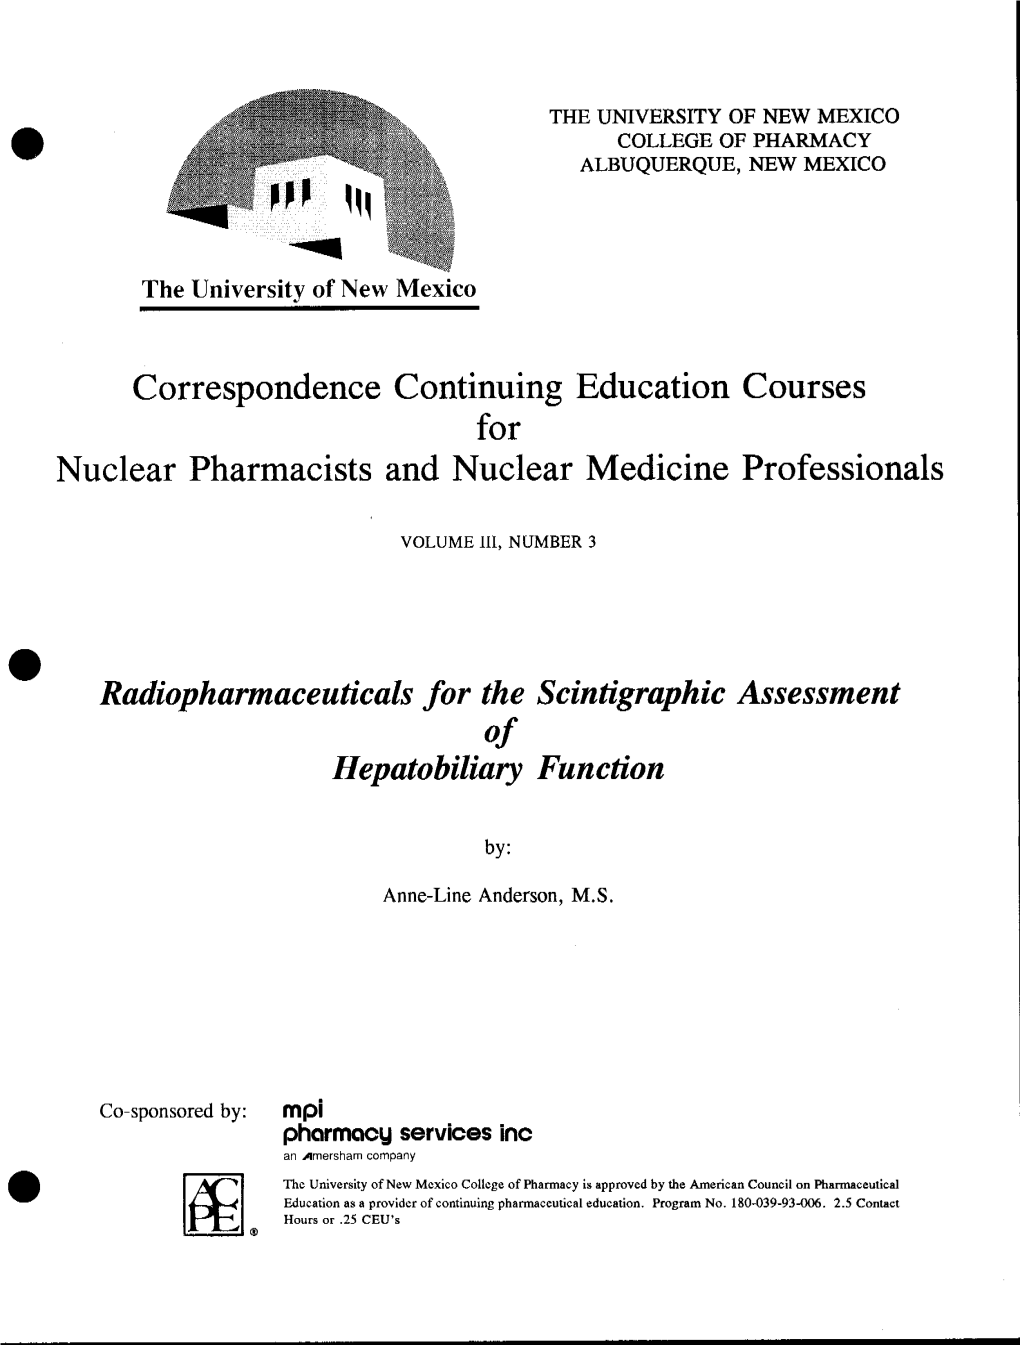 Correspondence Continuing Education for Nuclear Pharmacists